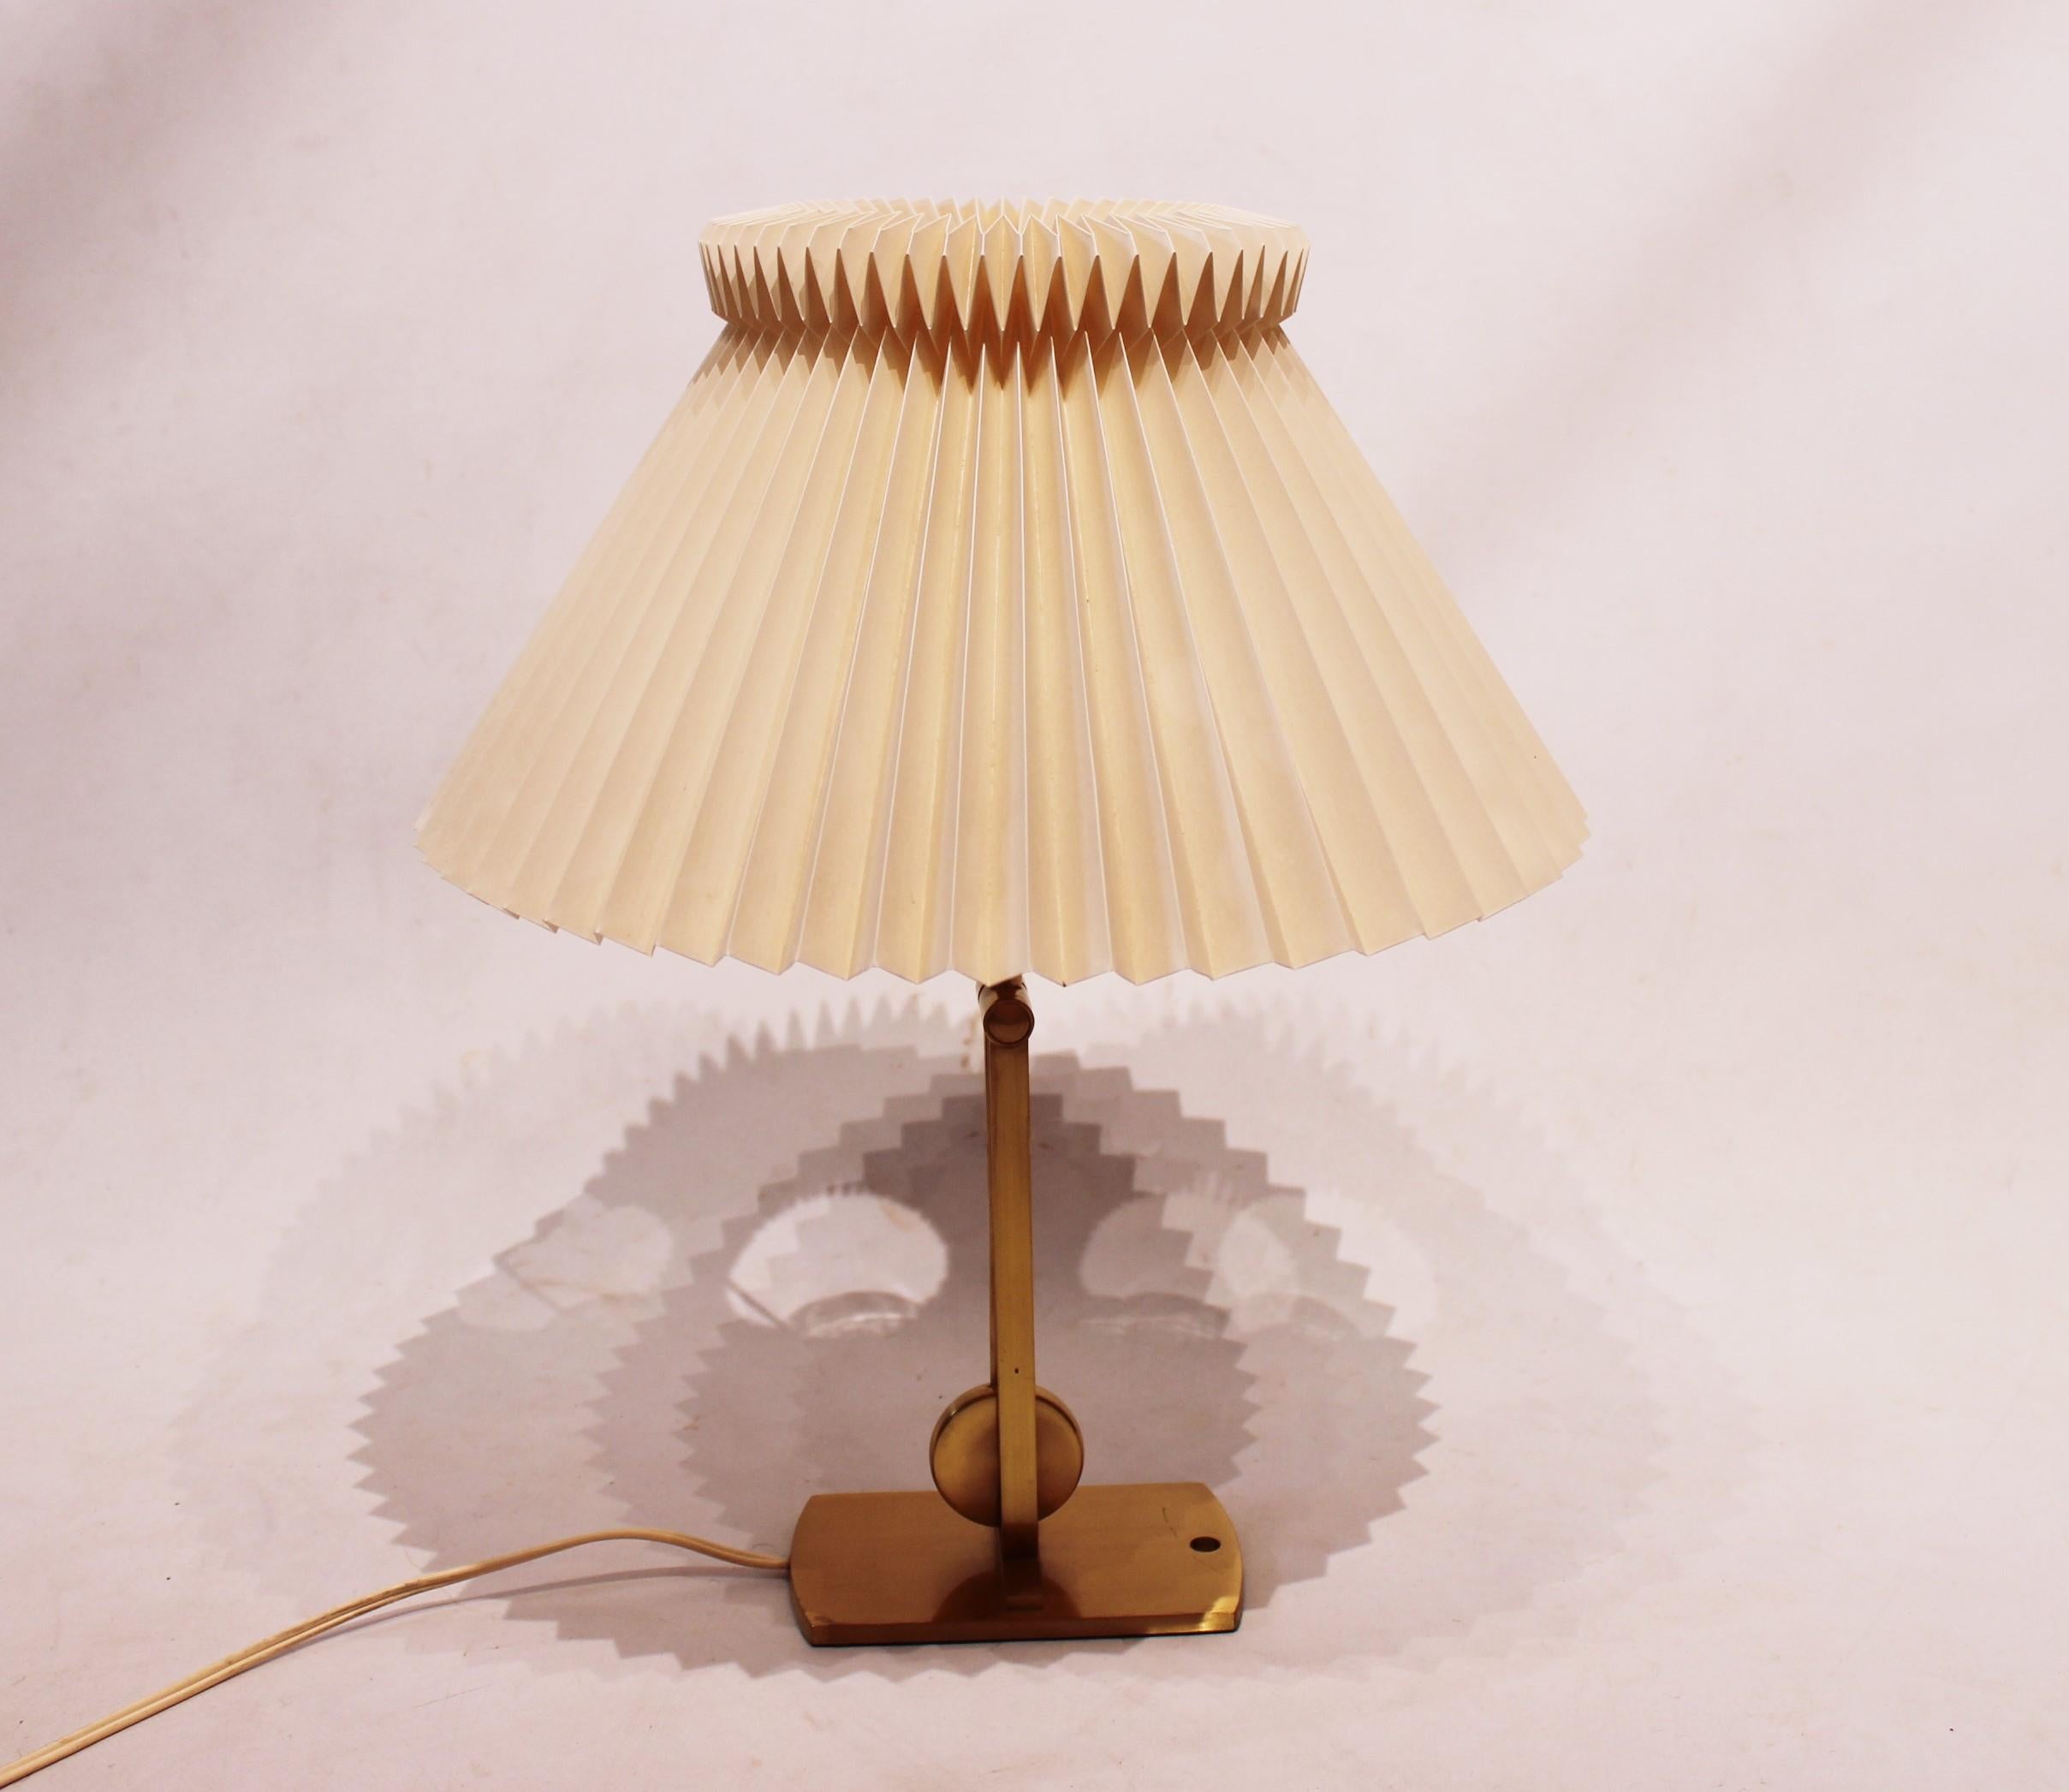 Table- and wall lamp, model 340, manufactured by Le Klint. The lamp is made of brass and can be adjusted. The lamp serves as both table- and wall lamp.